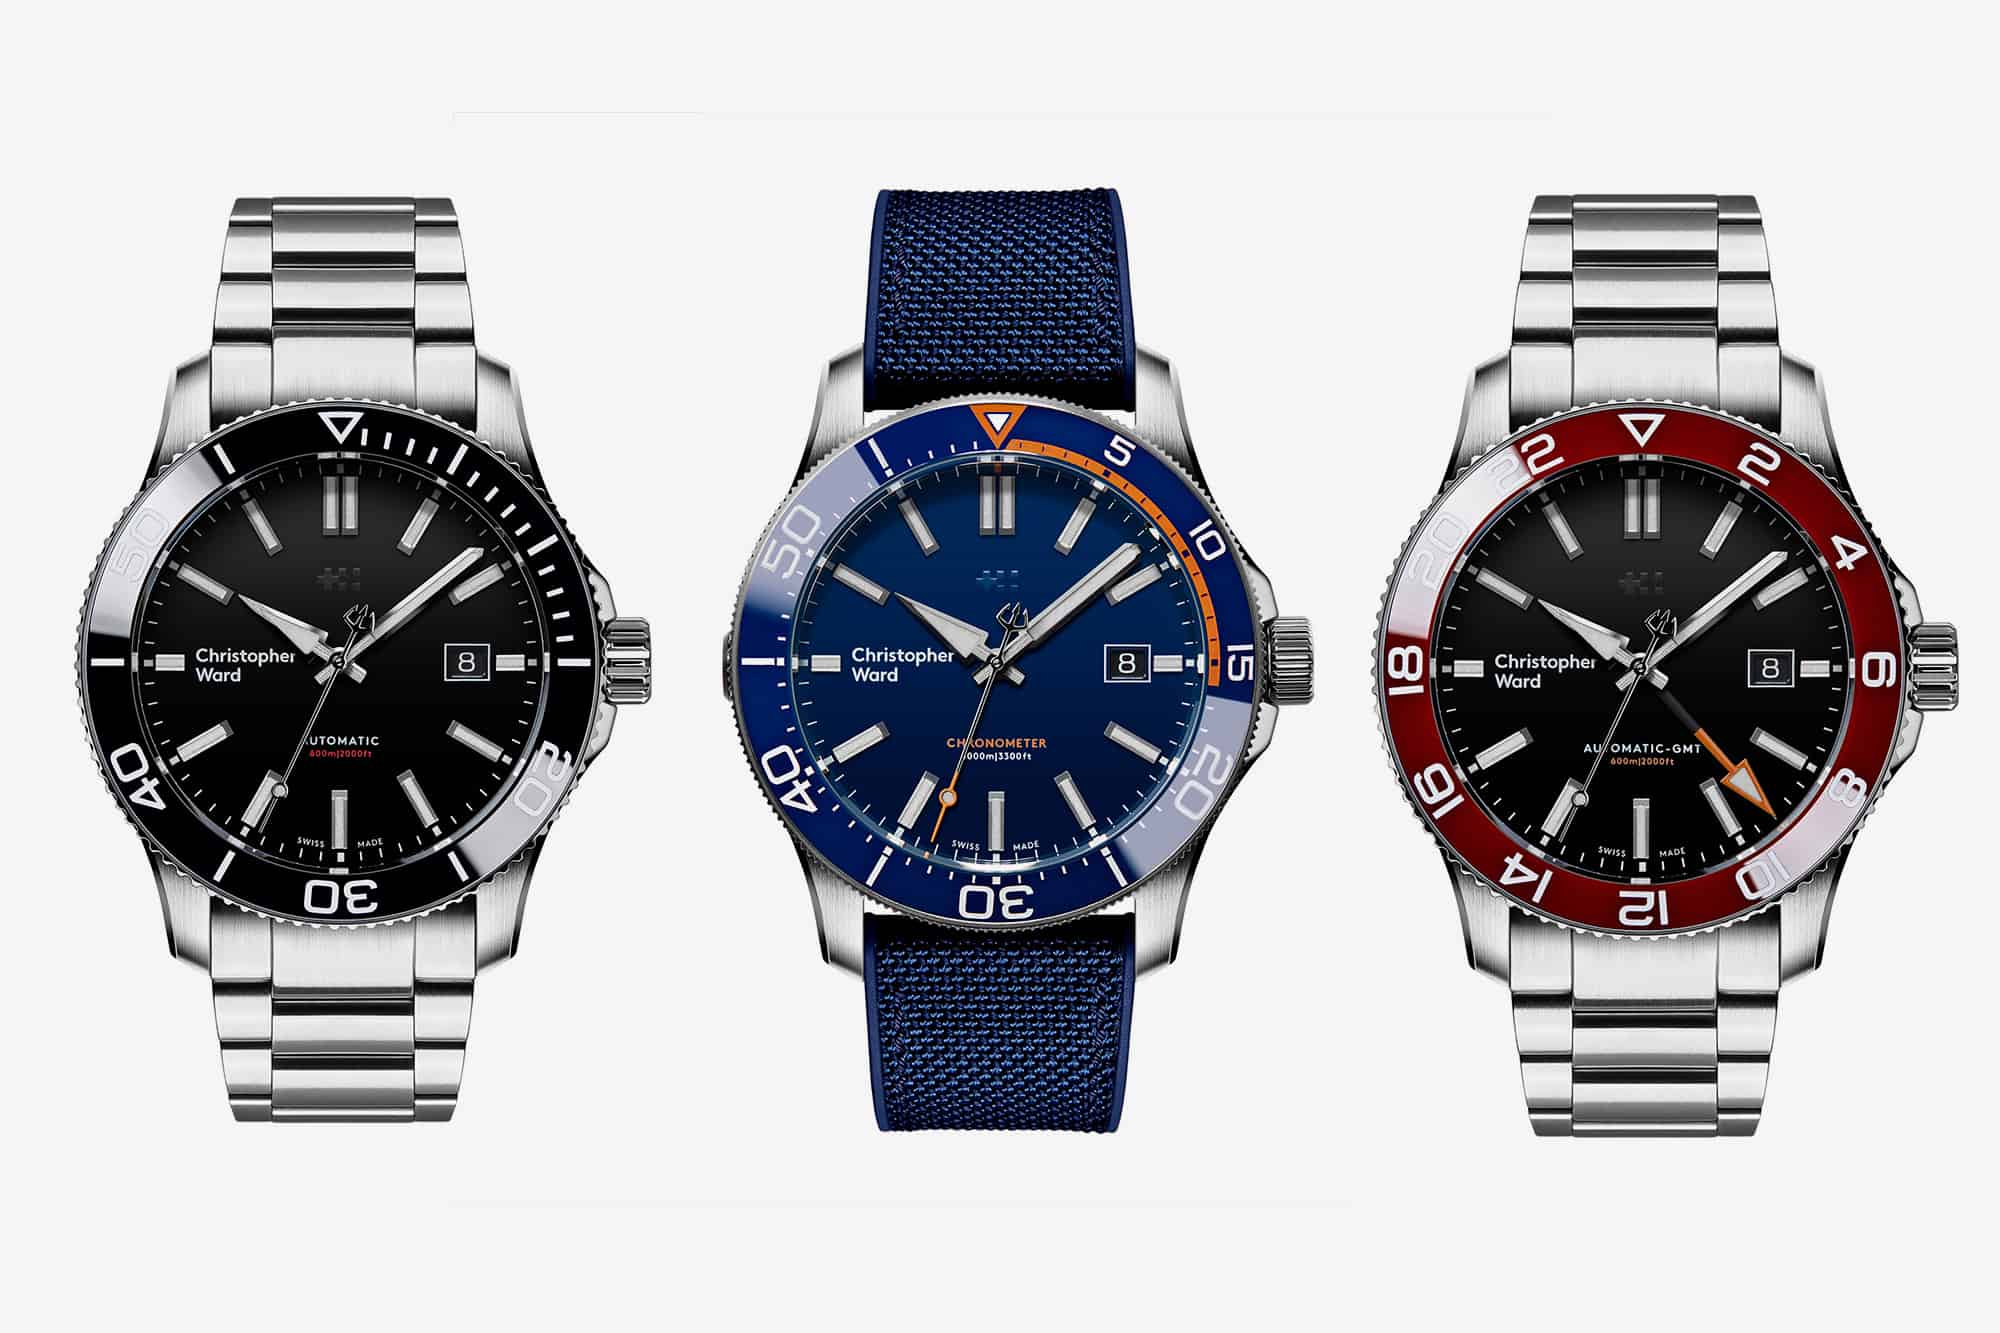 Introducing the Christopher Ward Trident 3 Collection, a Revamp of the Brand’s Iconic, Value-Packed Dive Watch Range